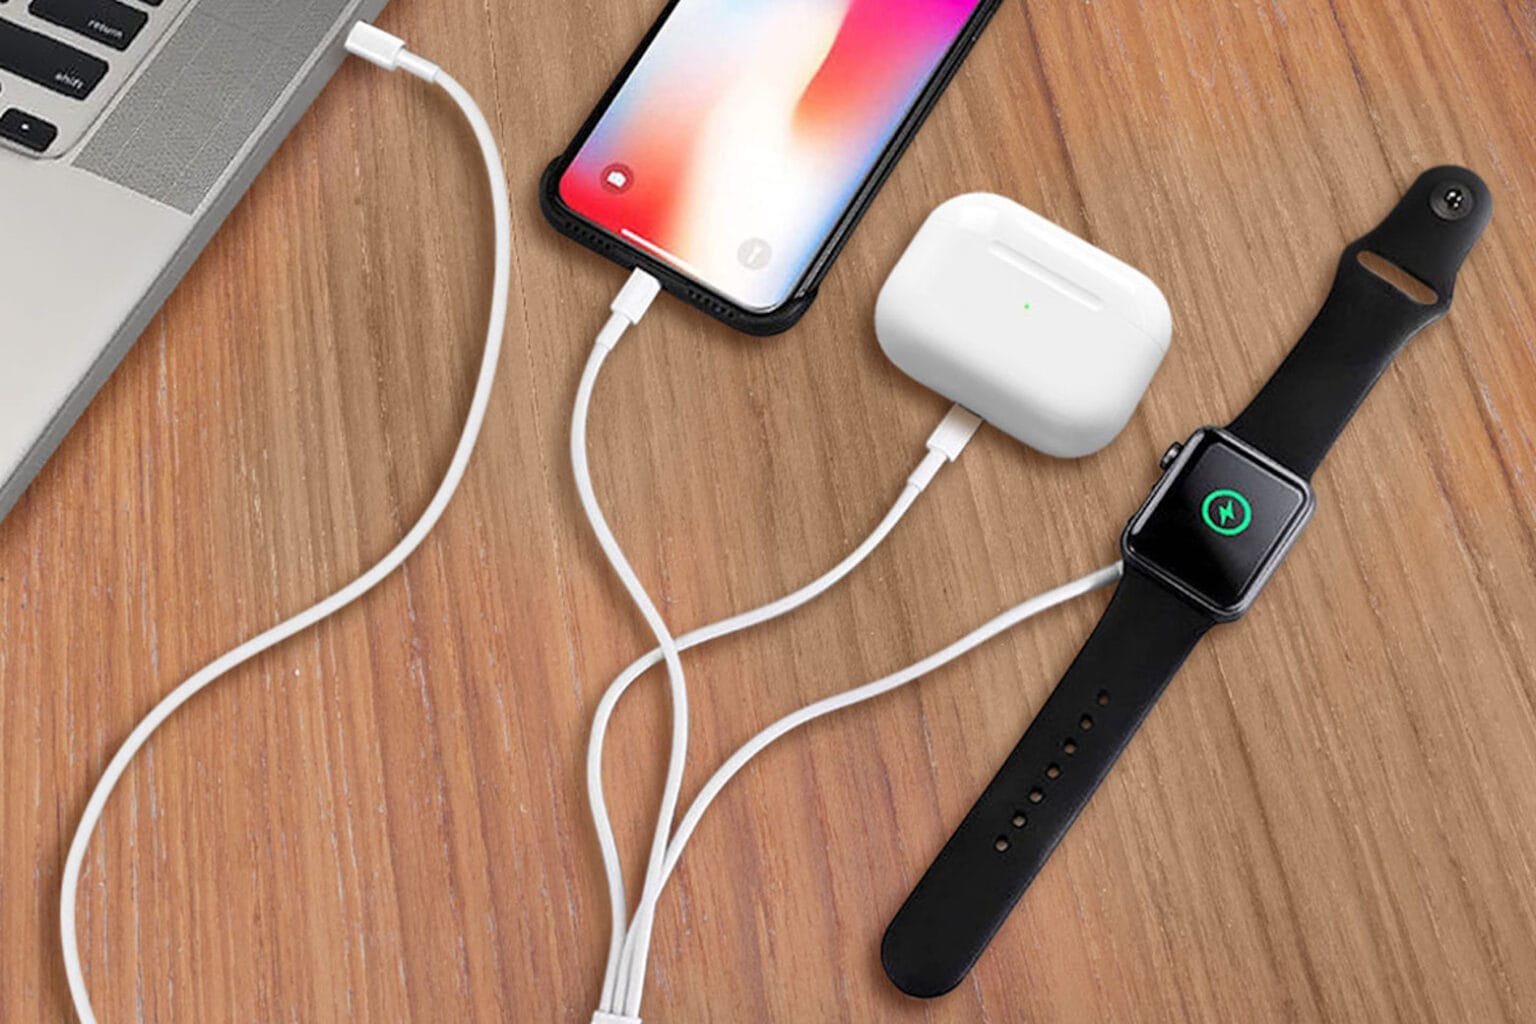 Just in time to go back to school, save more than $18 on this highly rated 3-in-1 charging cable.